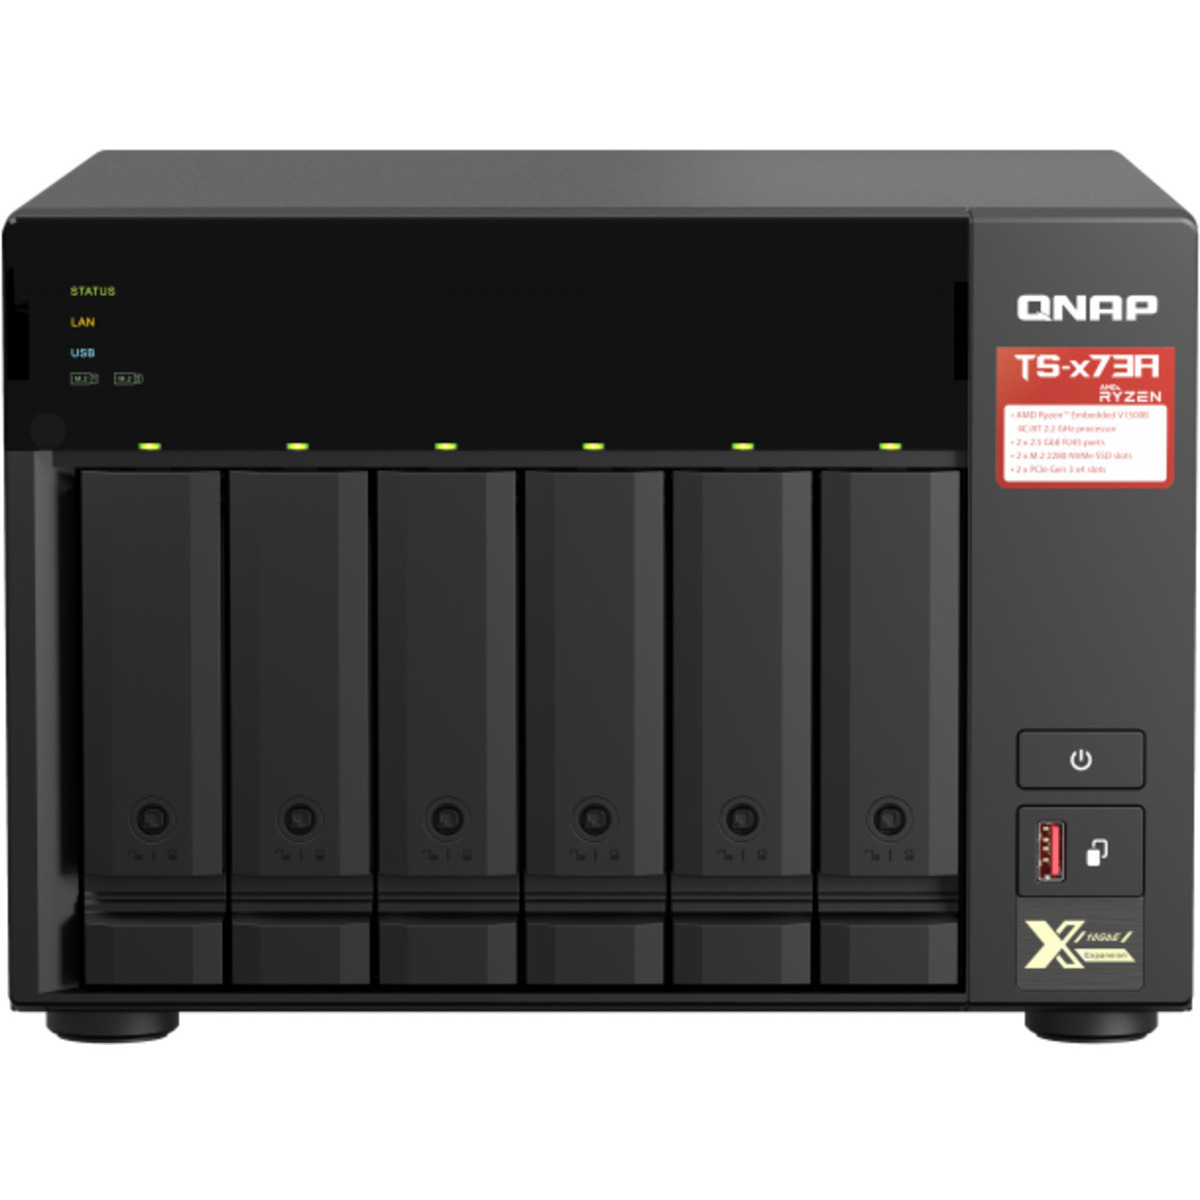 QNAP TS-673A 48tb 6-Bay Desktop Multimedia / Power User / Business NAS - Network Attached Storage Device 6x8tb Seagate IronWolf Pro ST8000NT001 3.5 7200rpm SATA 6Gb/s HDD NAS Class Drives Installed - Burn-In Tested - ON SALE TS-673A